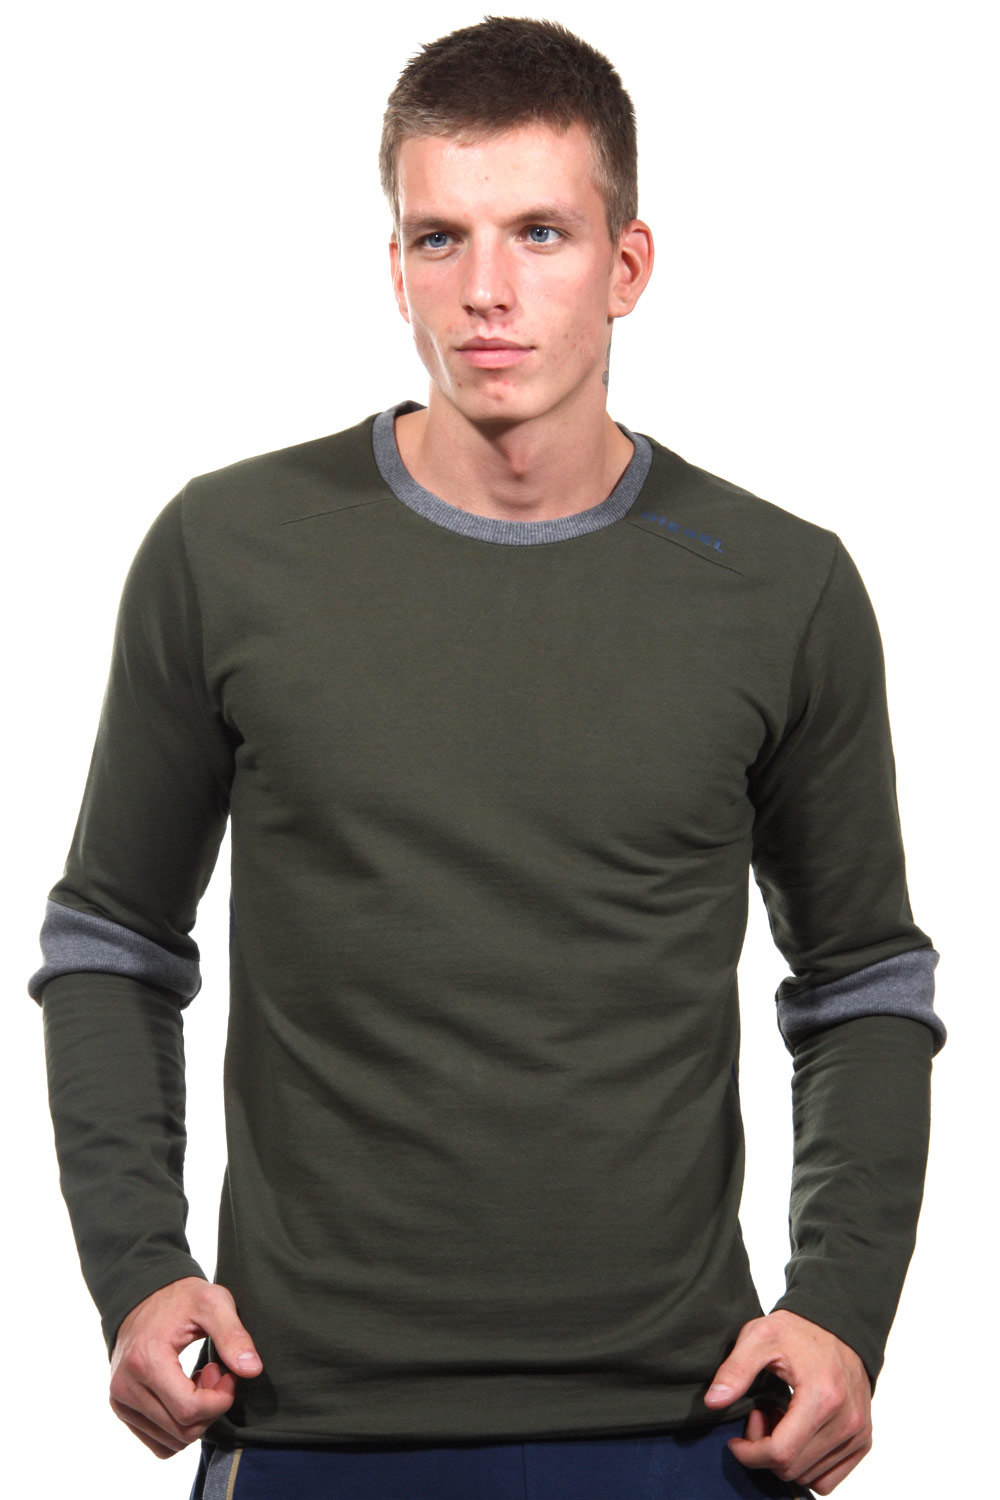 DIESEL WILLY long sleeve top at oboy.com